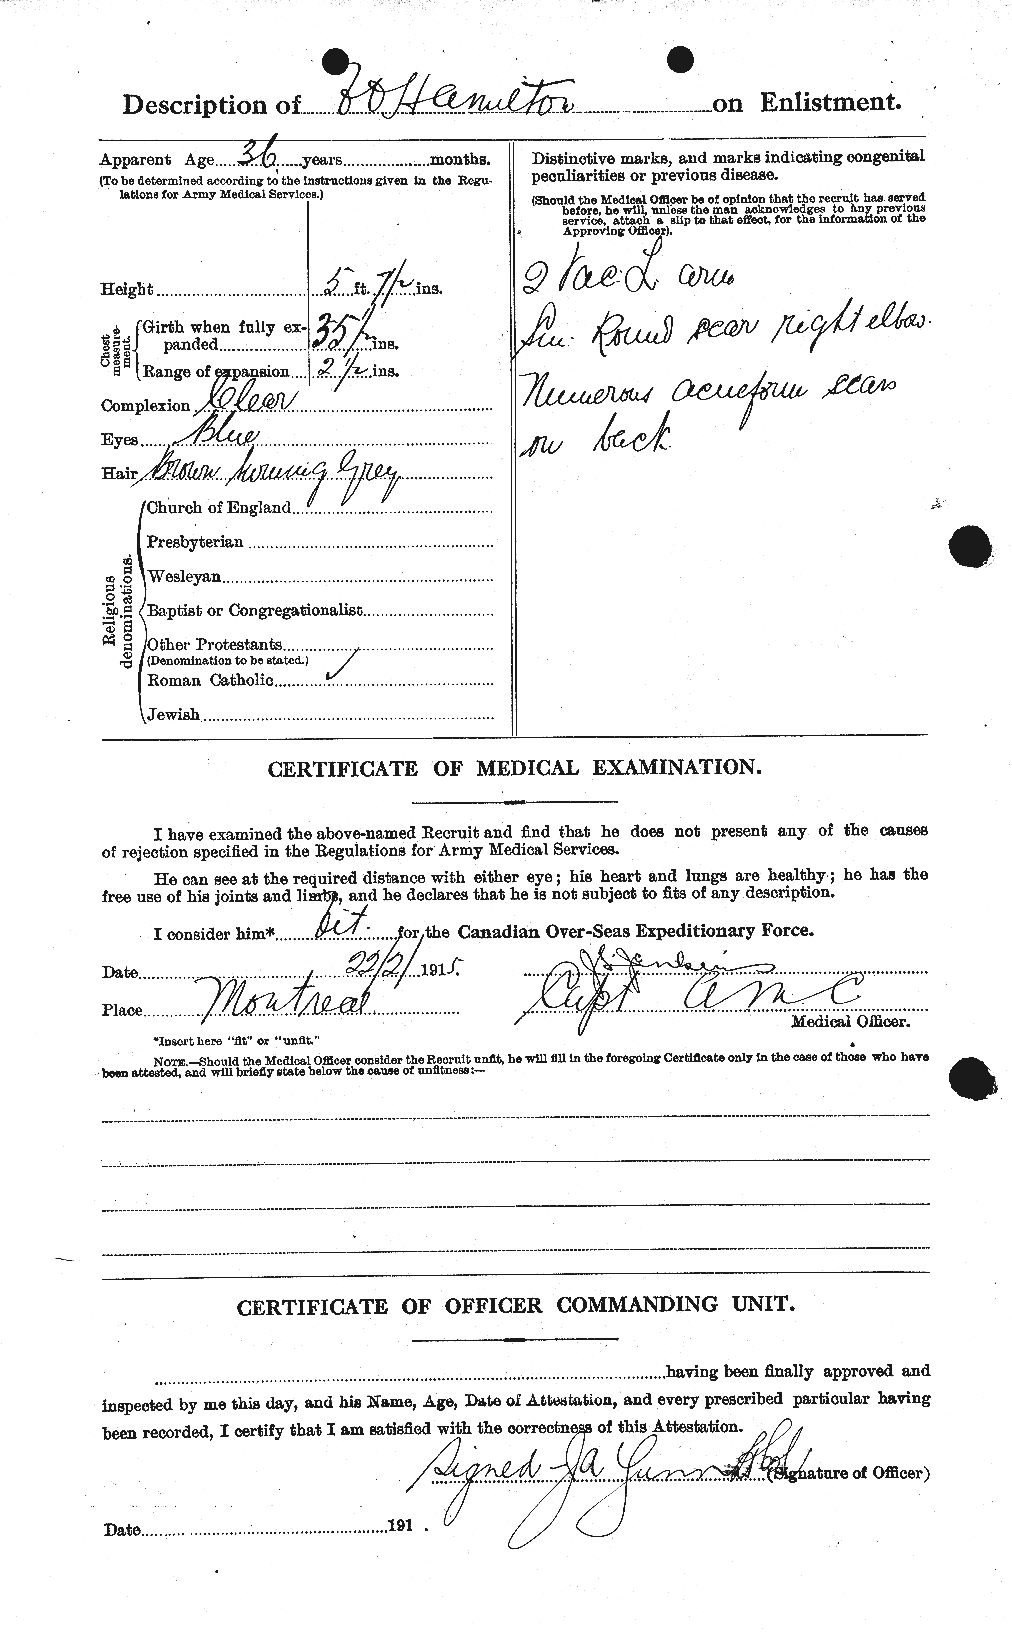 Personnel Records of the First World War - CEF 372392b